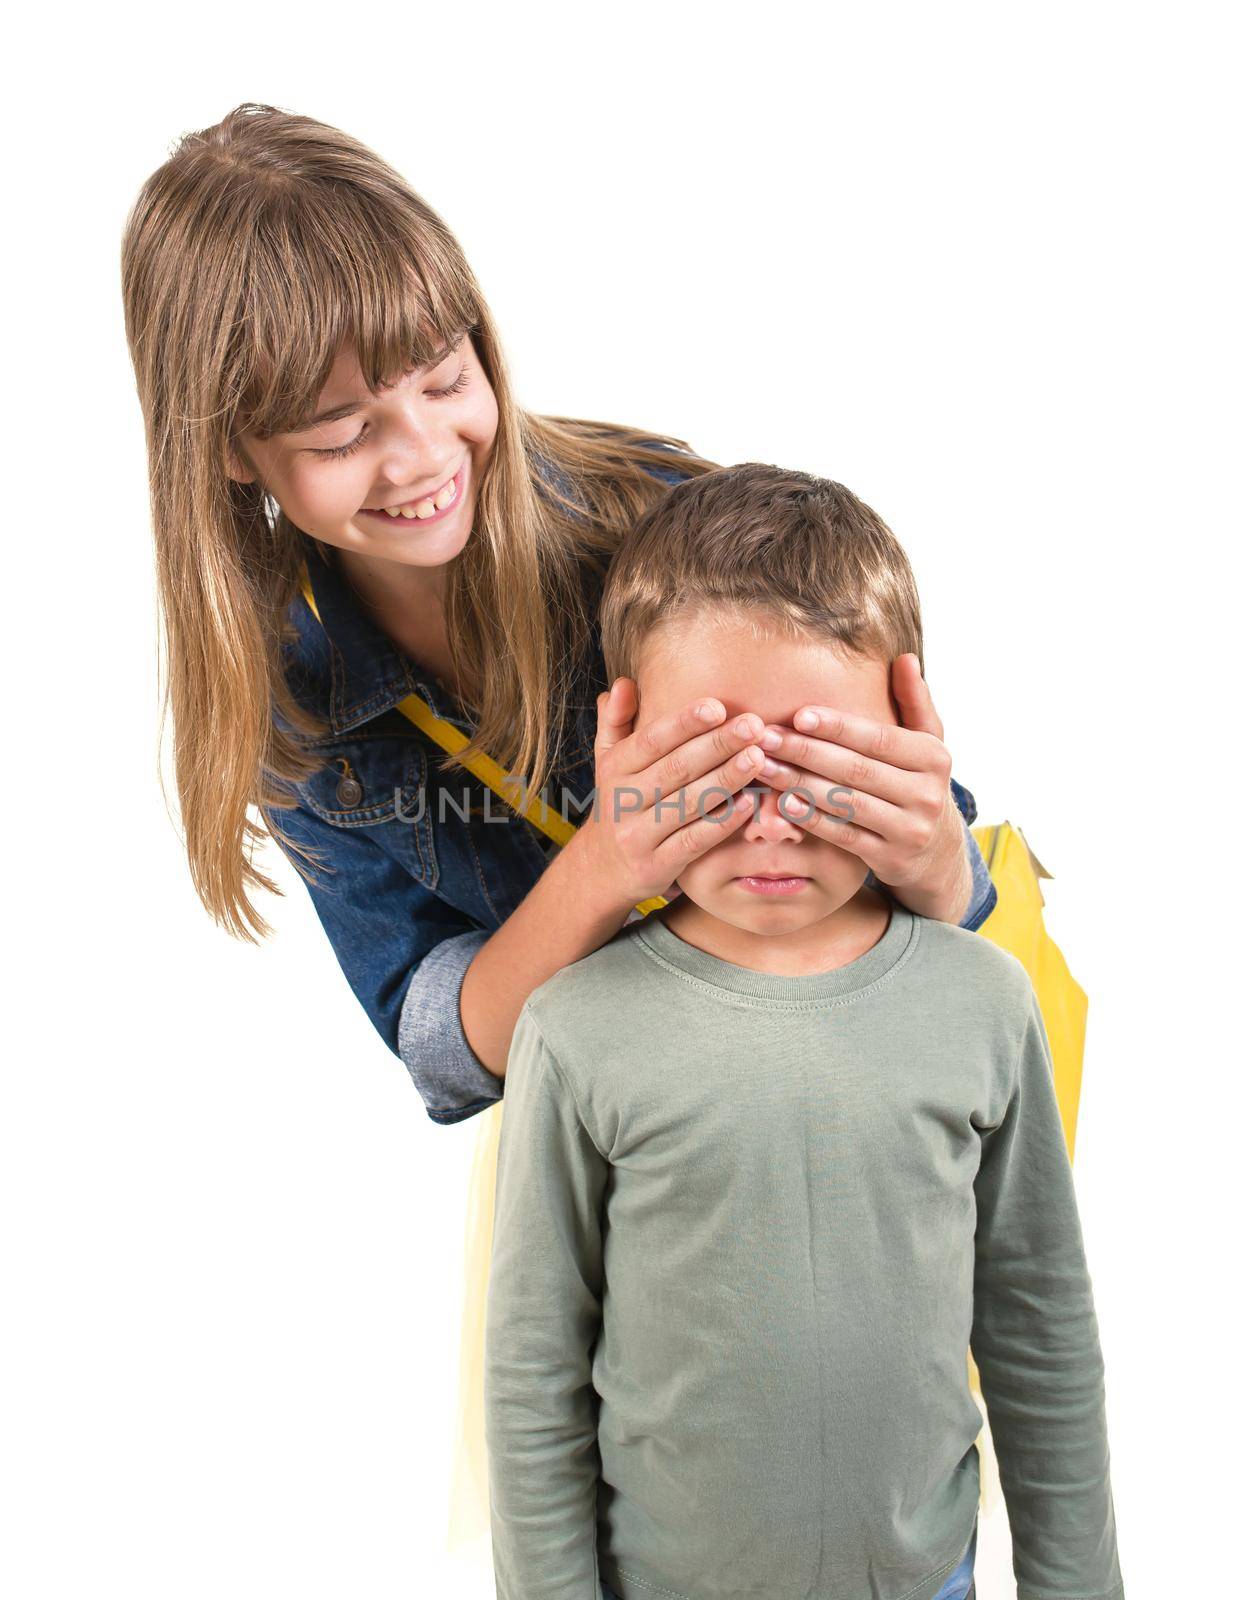 Teen boy covering girl's eyes to surprise her. Portrait of brother and sister isolated on white background. Funny couple children laughing with a perfect smile.